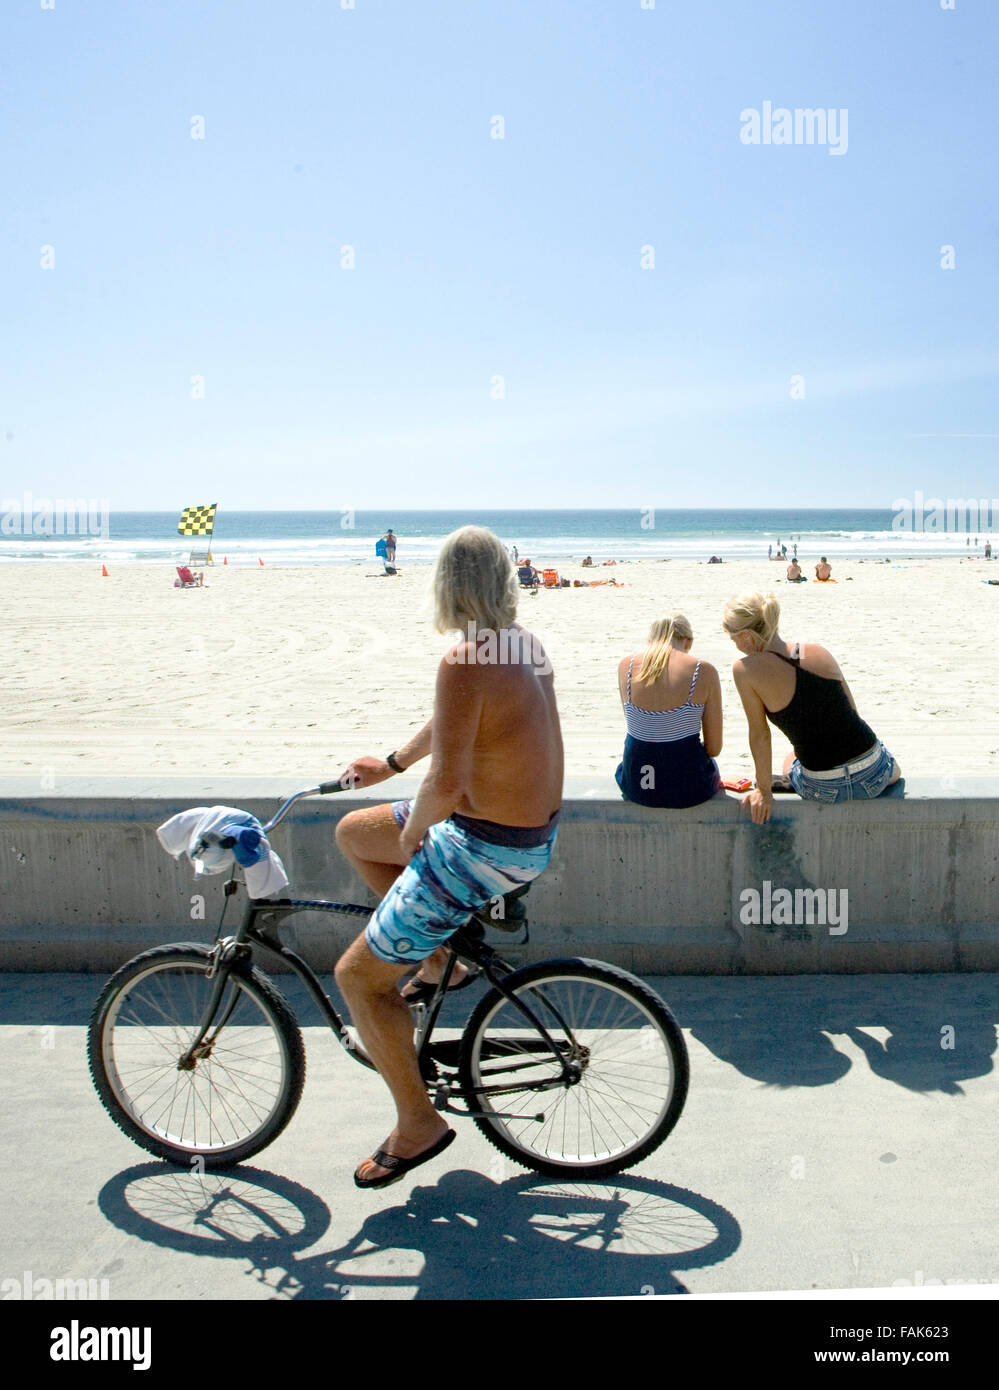 Man cycling along a beach, California with two girls sitting on a wall. Stock Photo